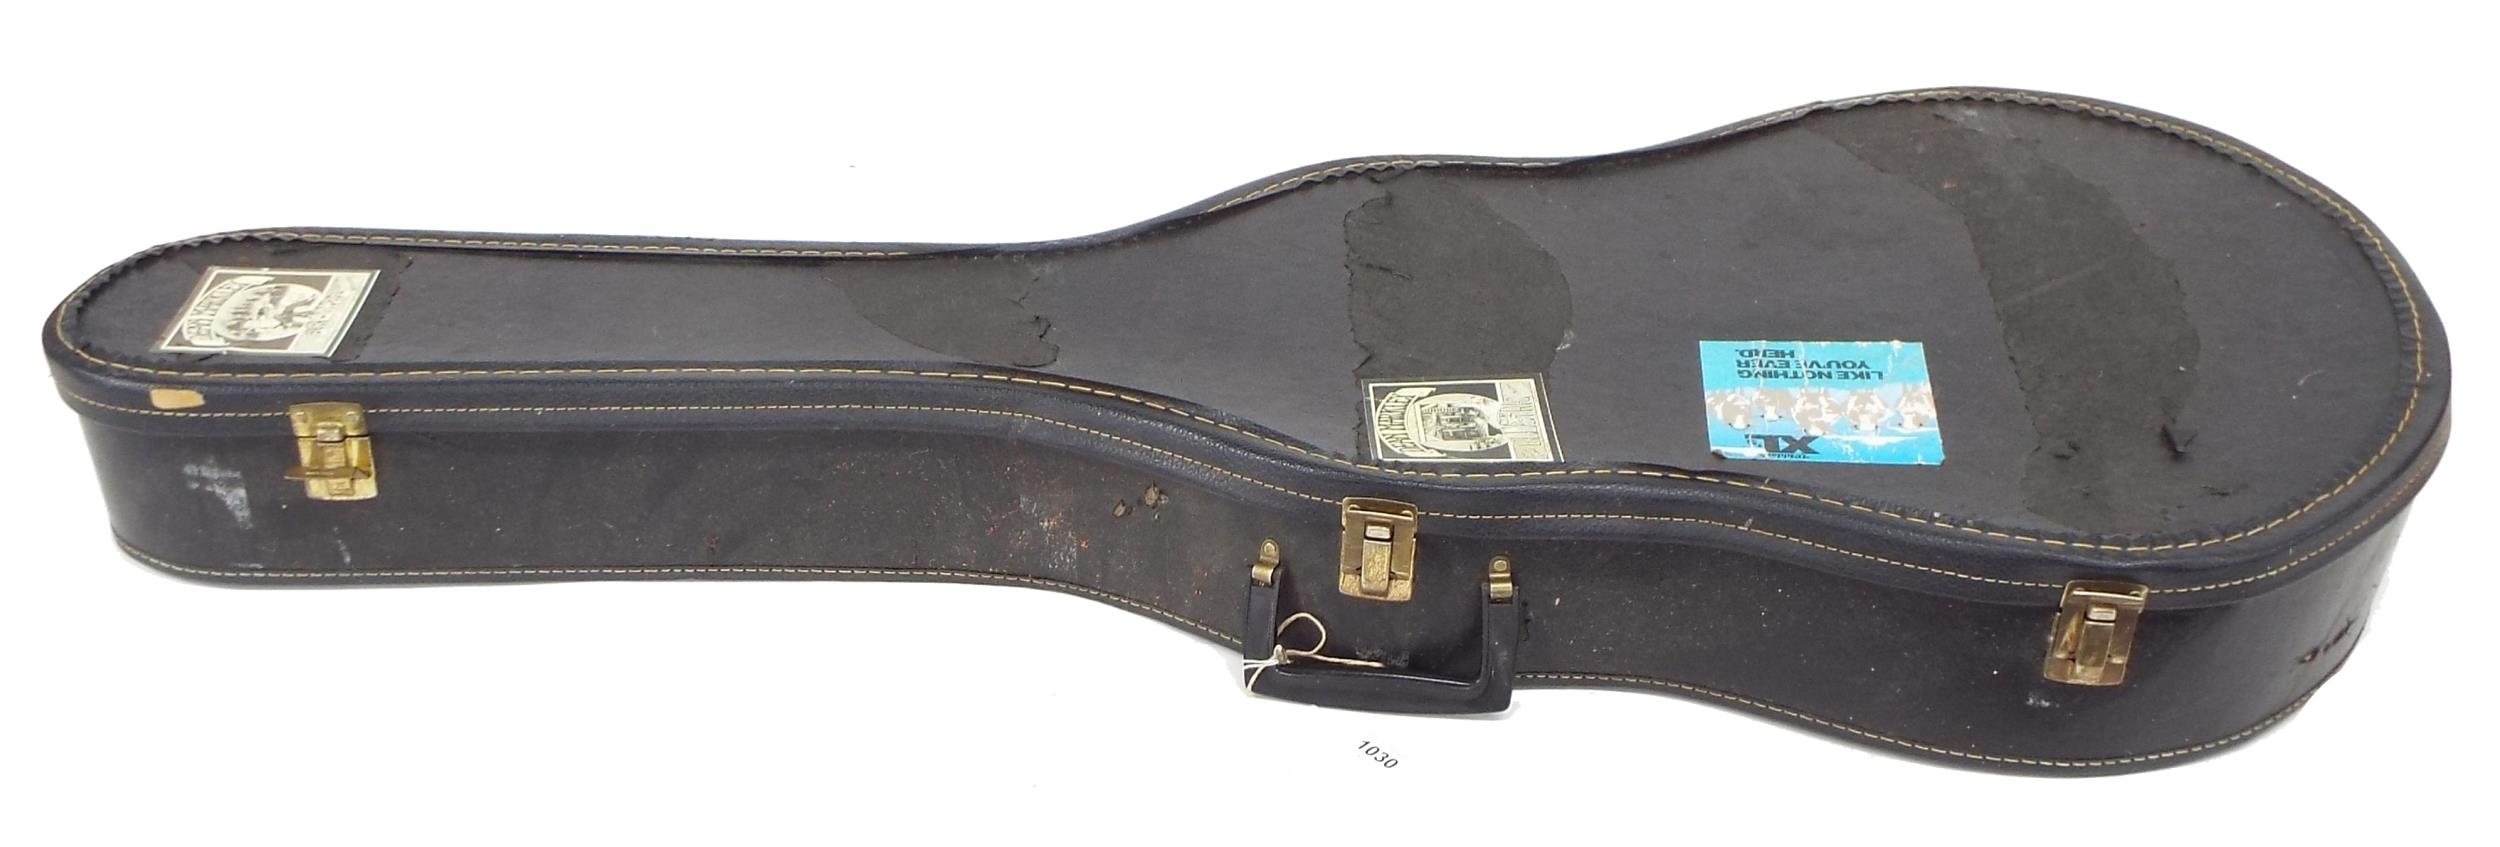 Old semi-rigid Thinline electric guitar hard case with 16" lower bout, 4" deep approx - Image 2 of 2